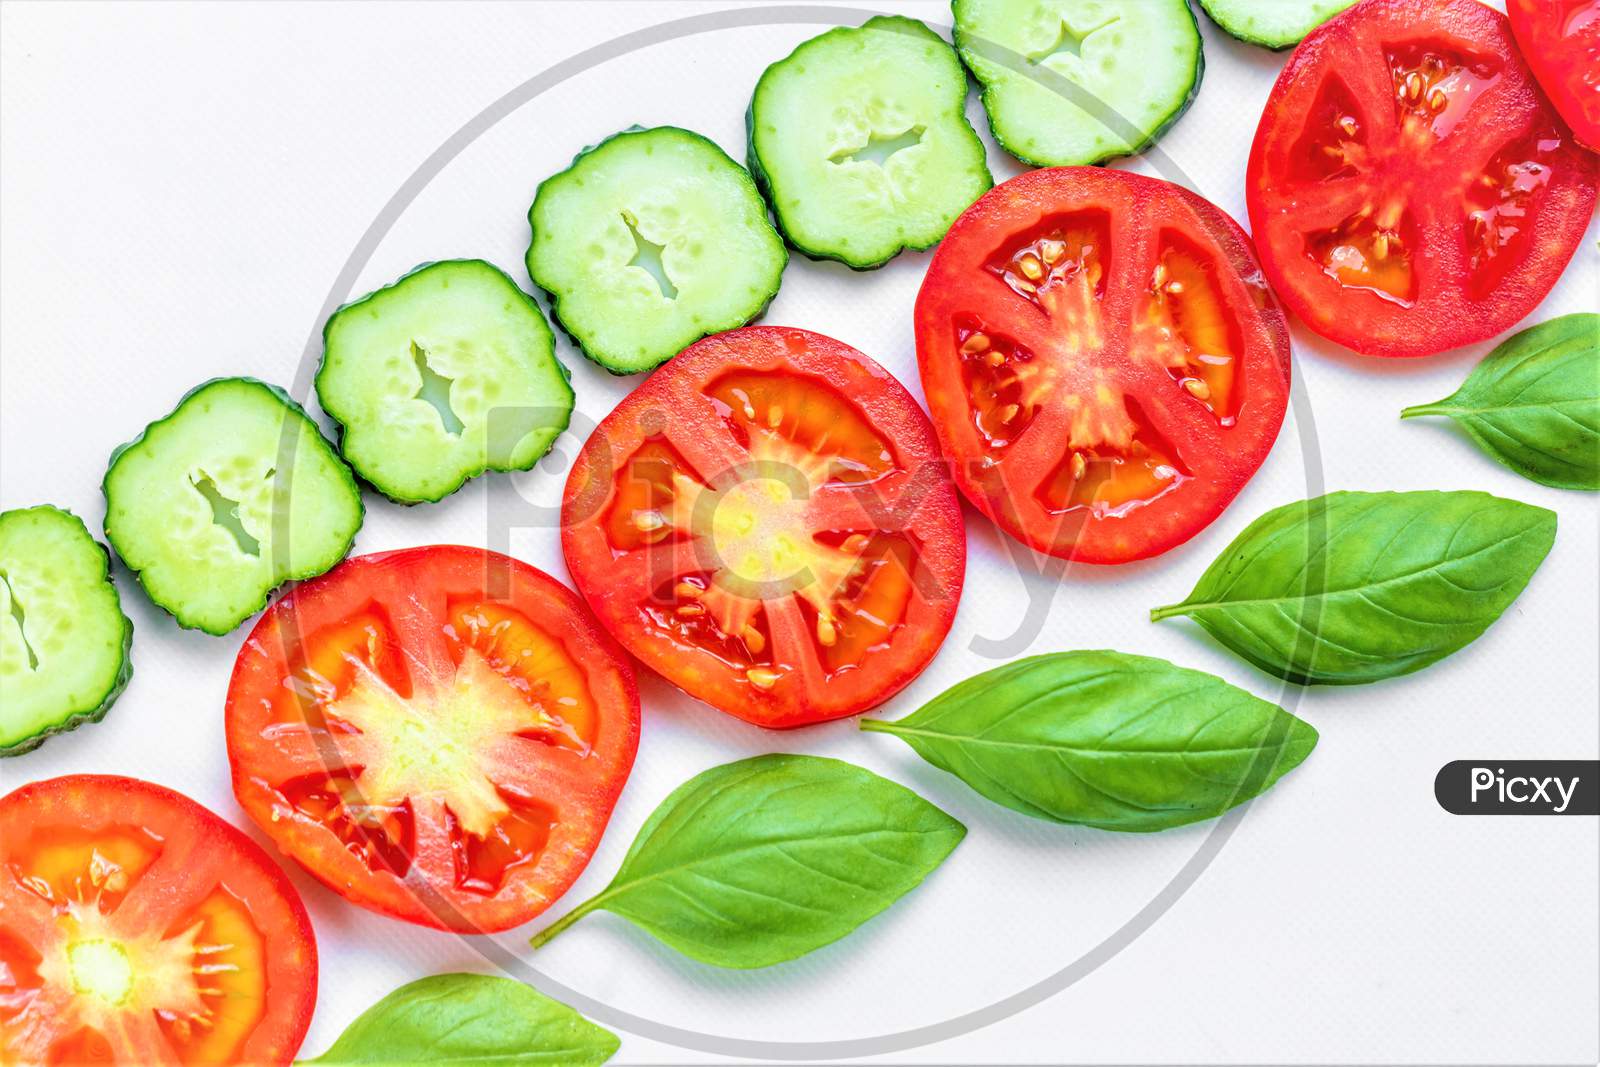 Round Pieces Of Cucumber, Tomato And Basil Leaves. Top View